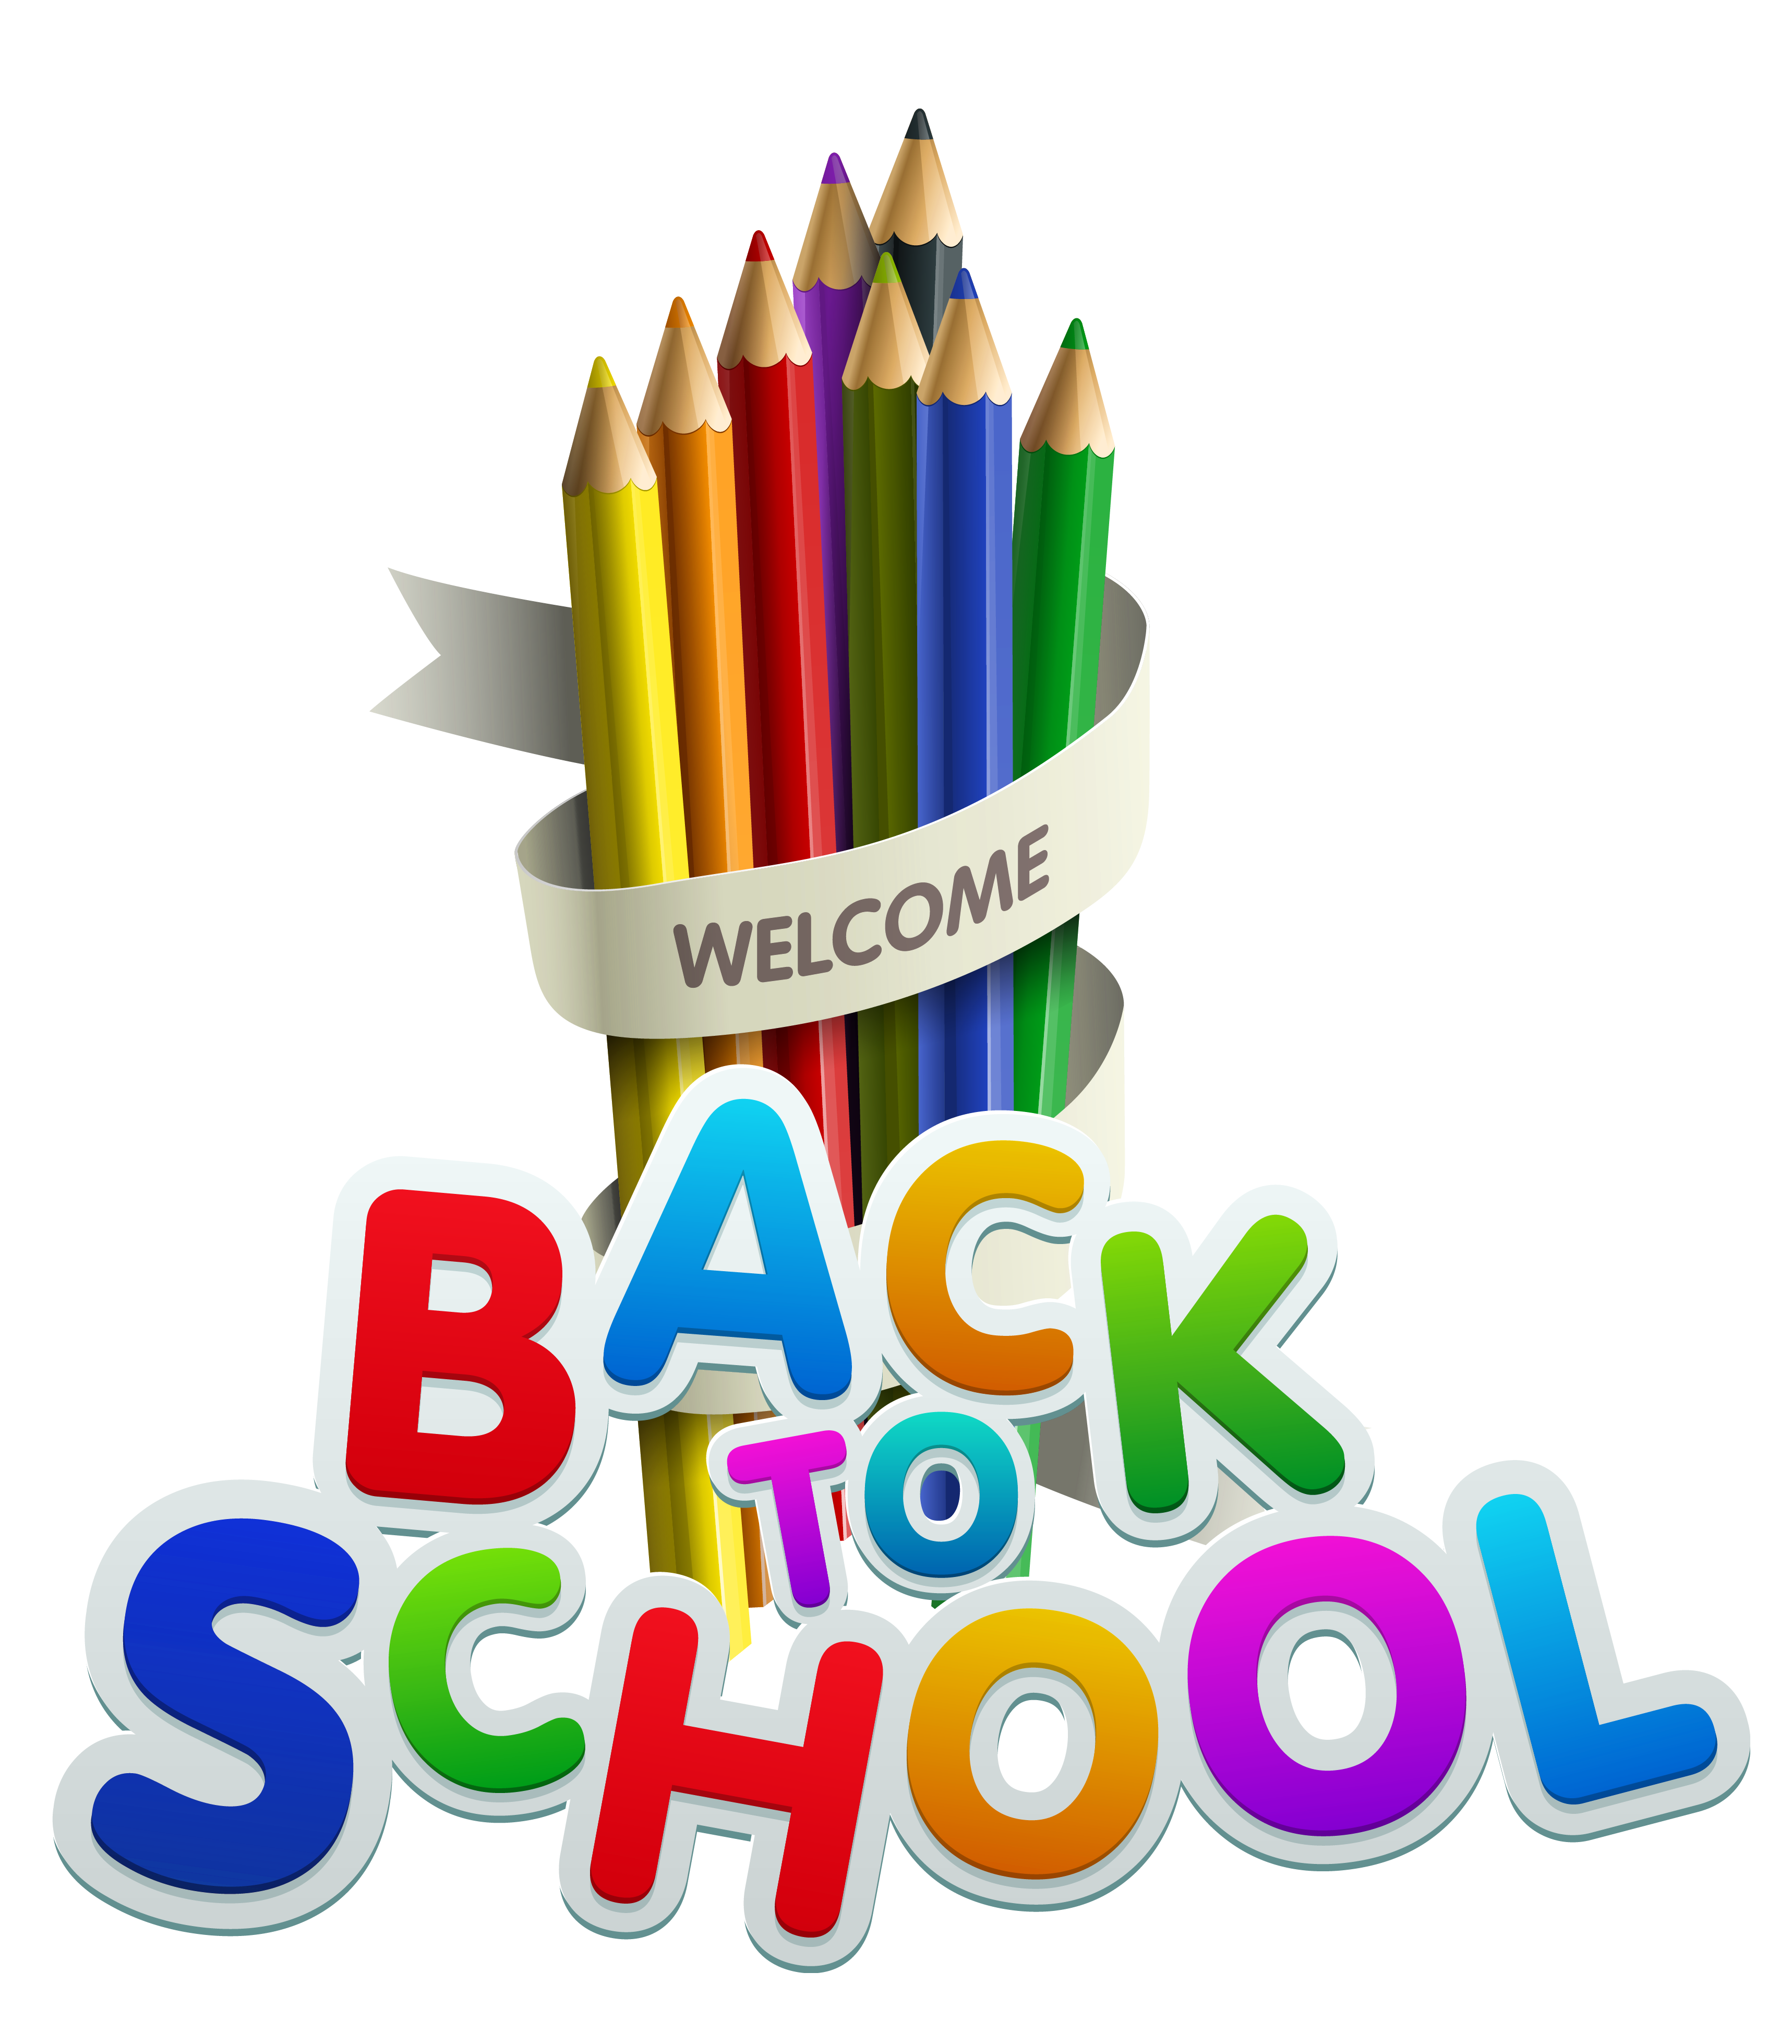 Back to school owl clipart free clipart images clipartcow